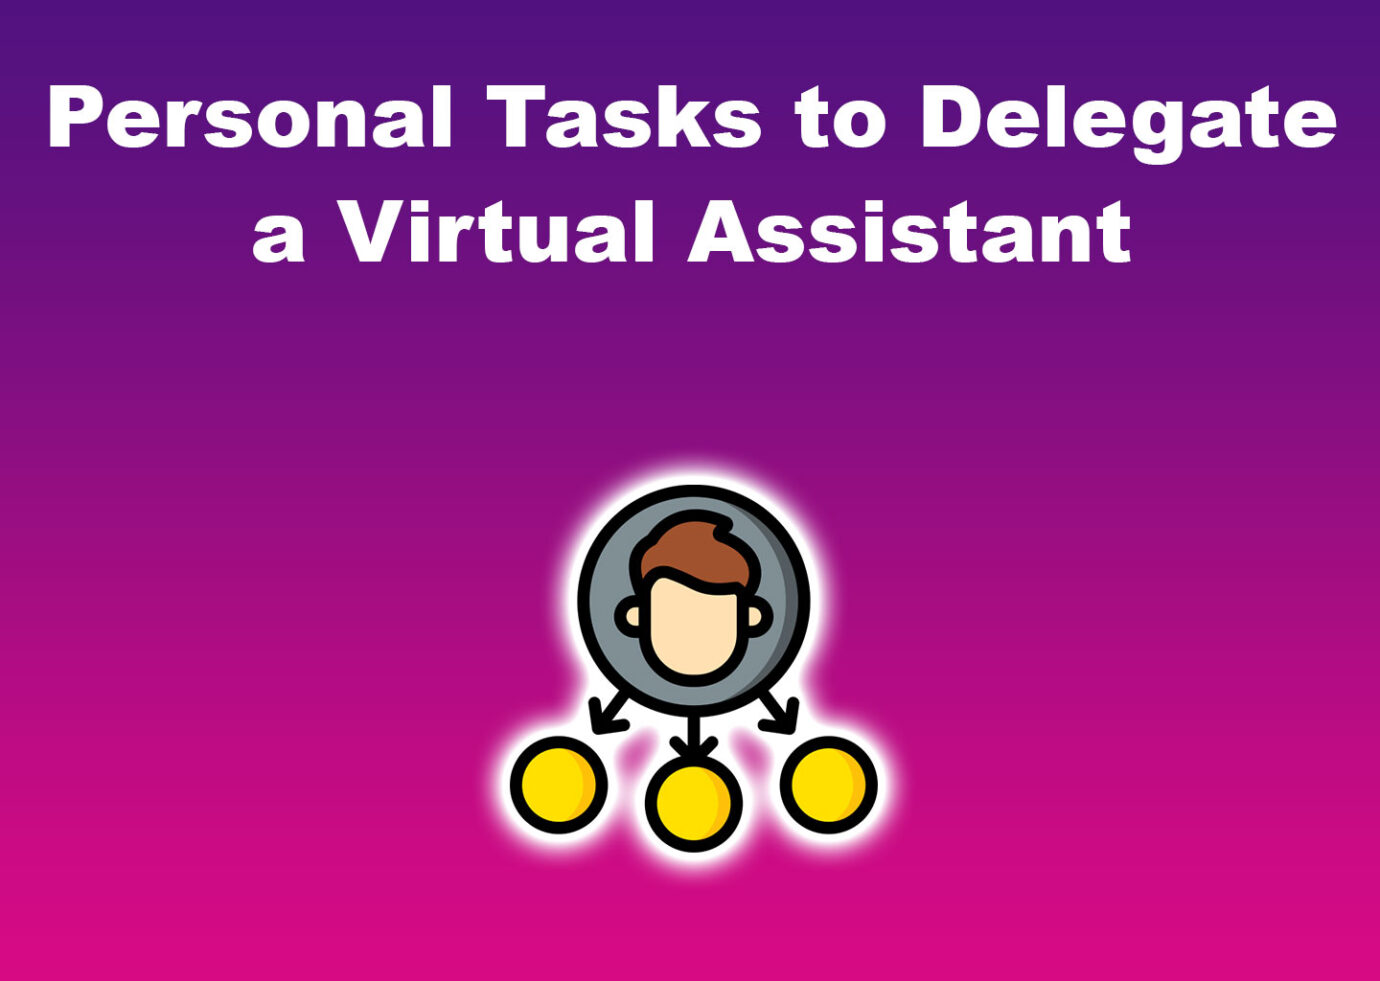 Personal Tasks to Delegate a Virtual Assistant